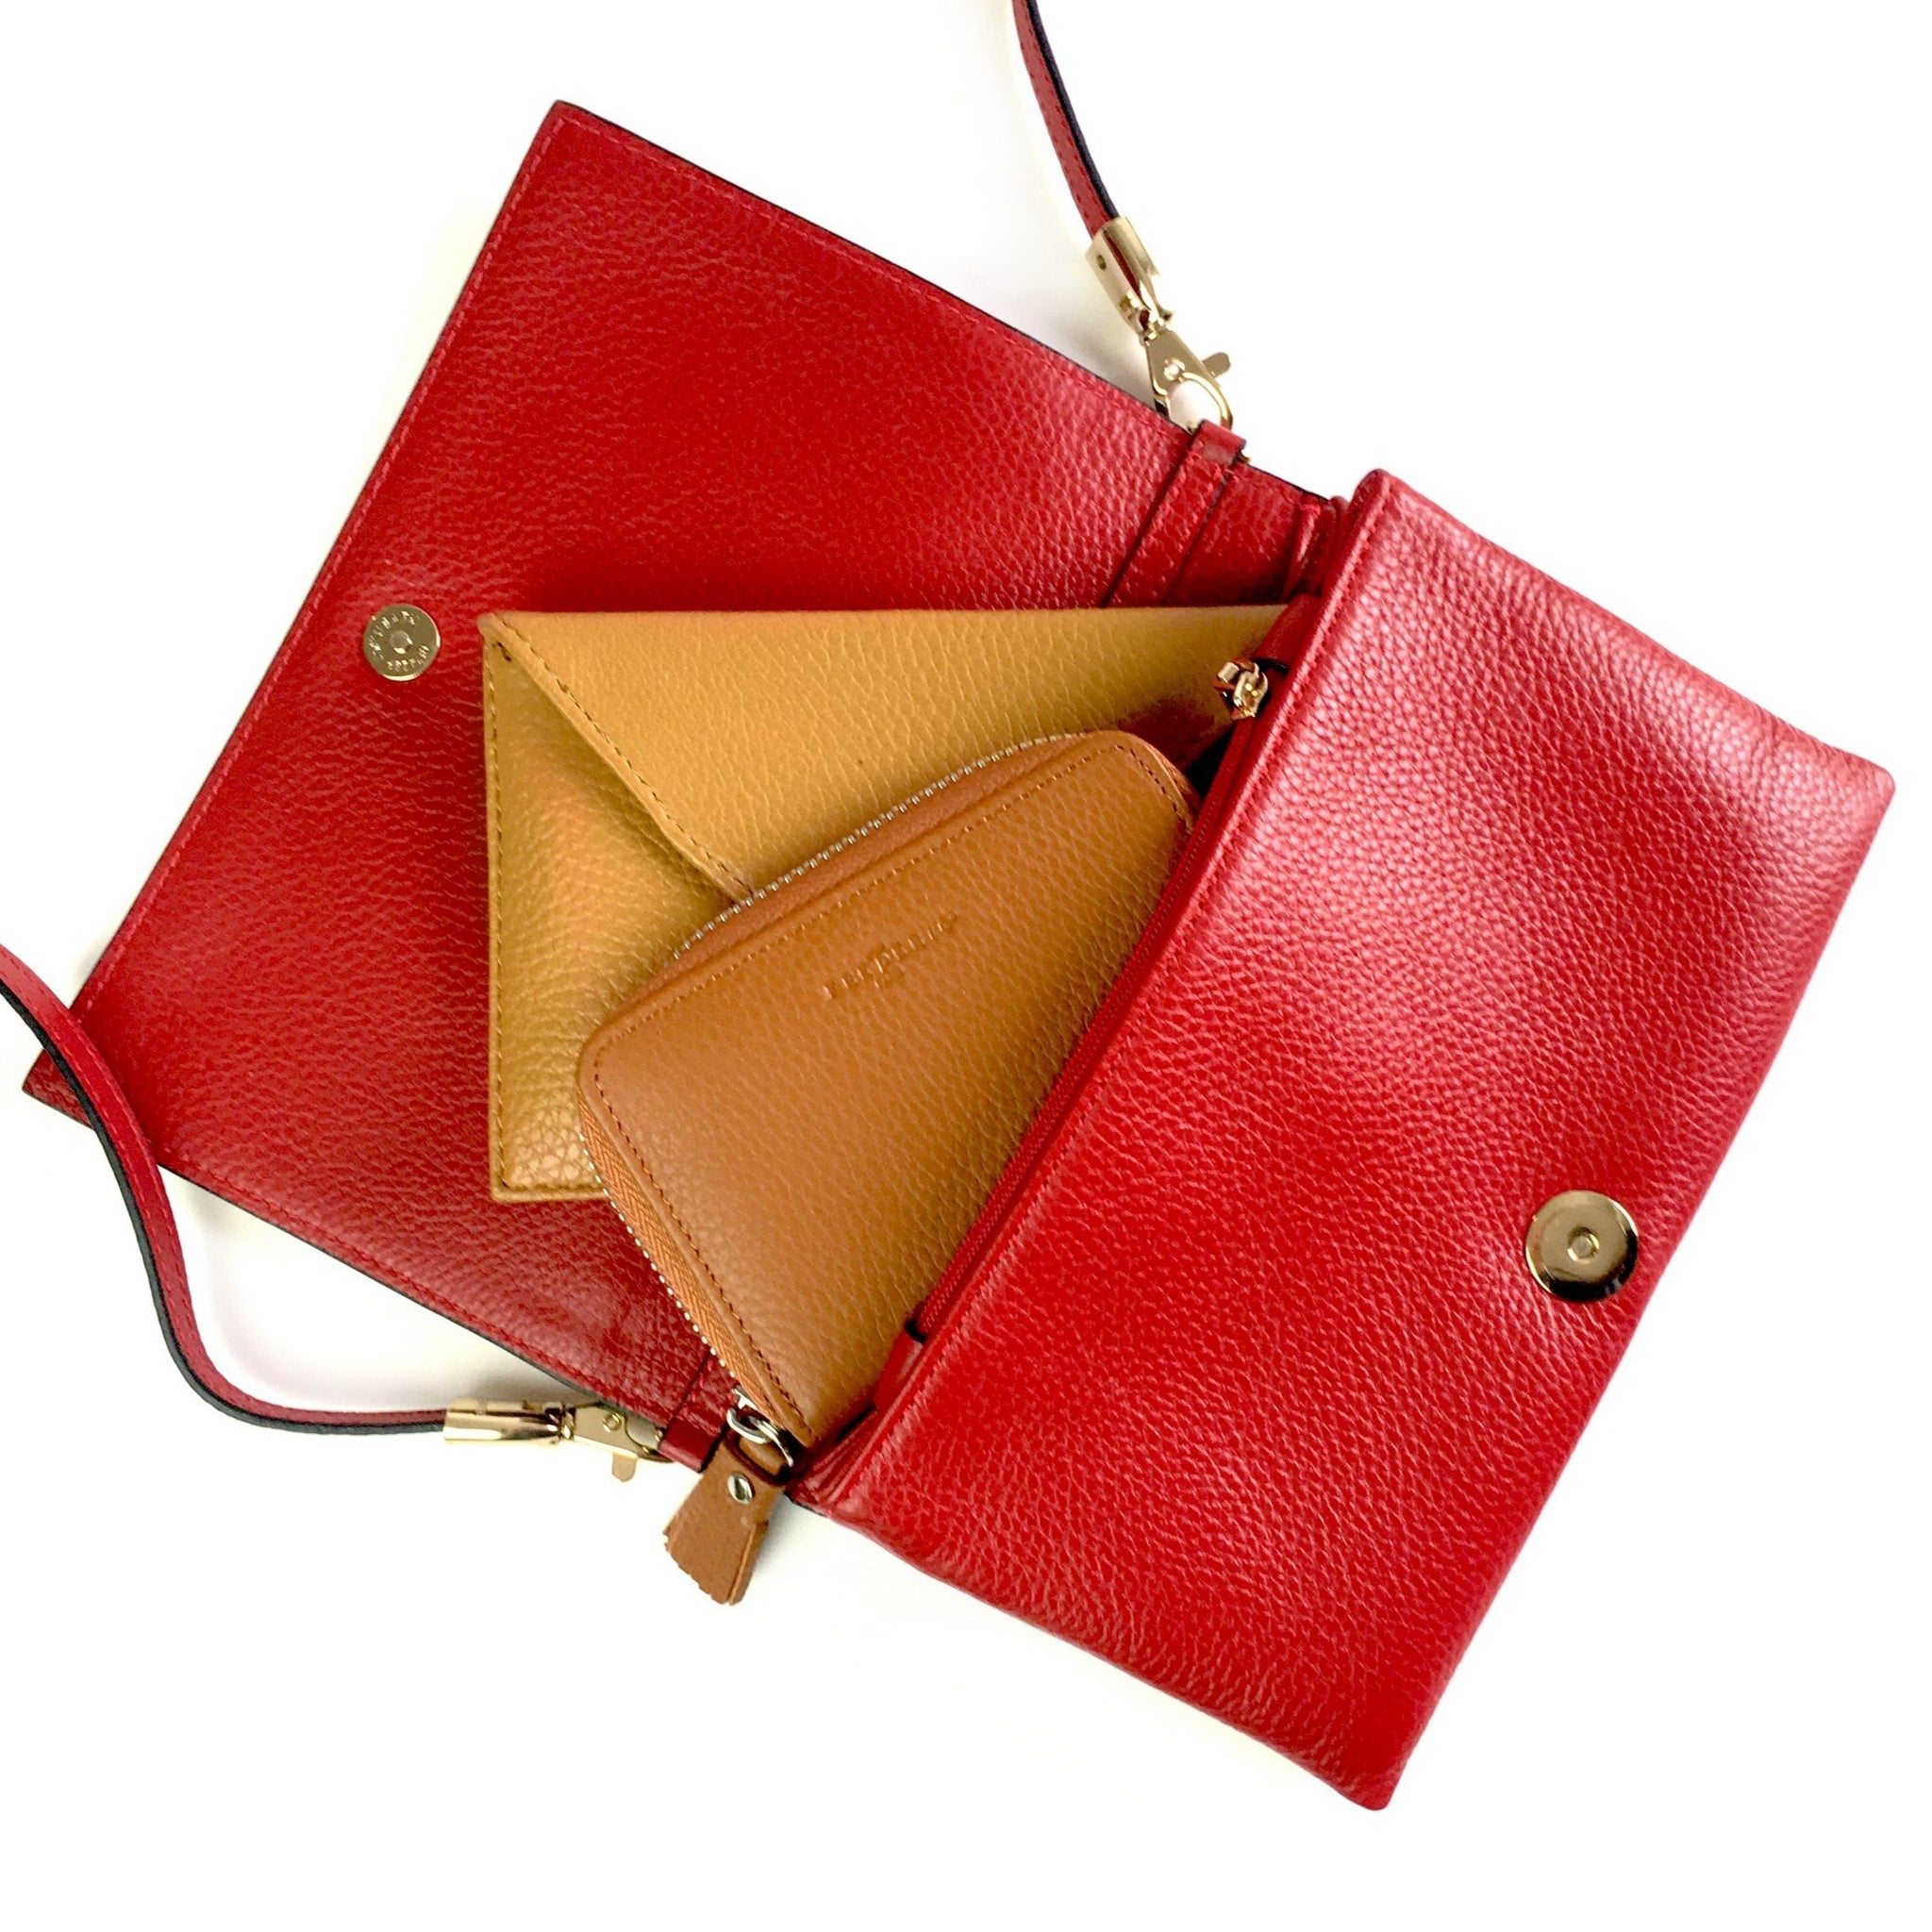 Luxurious smal leather bag, from collection in Paris – Obilis Paris